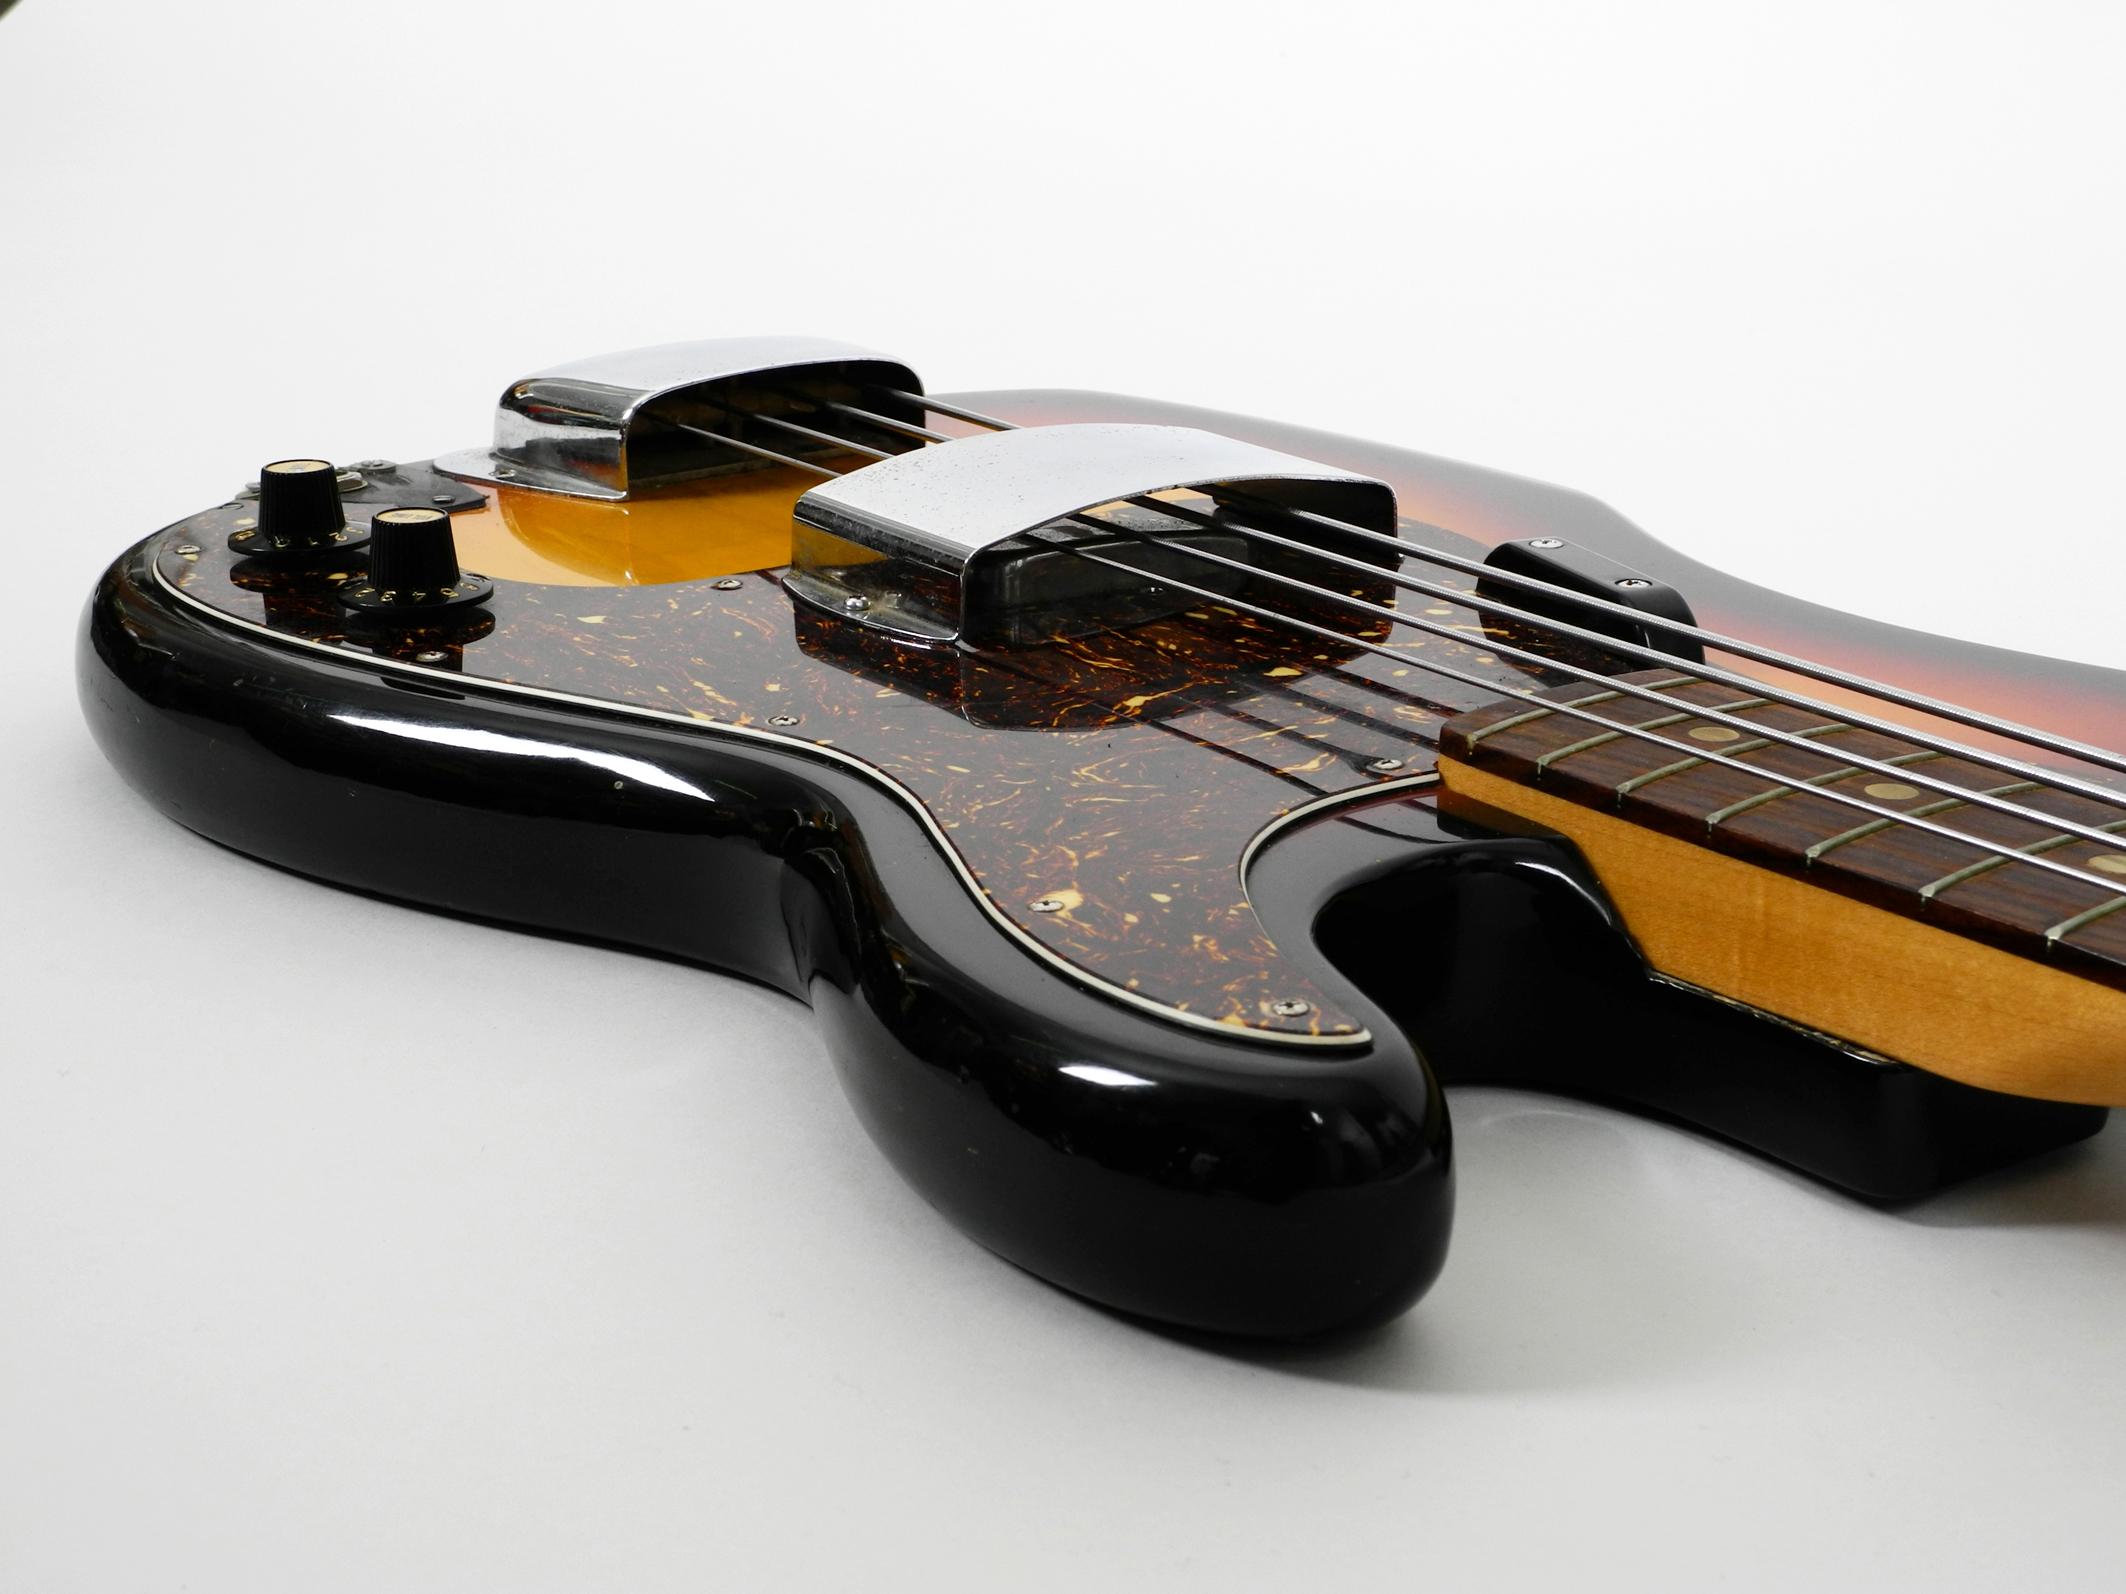 1970s Electric Vintage Jazz Bass Guitar from Luxor 100 1